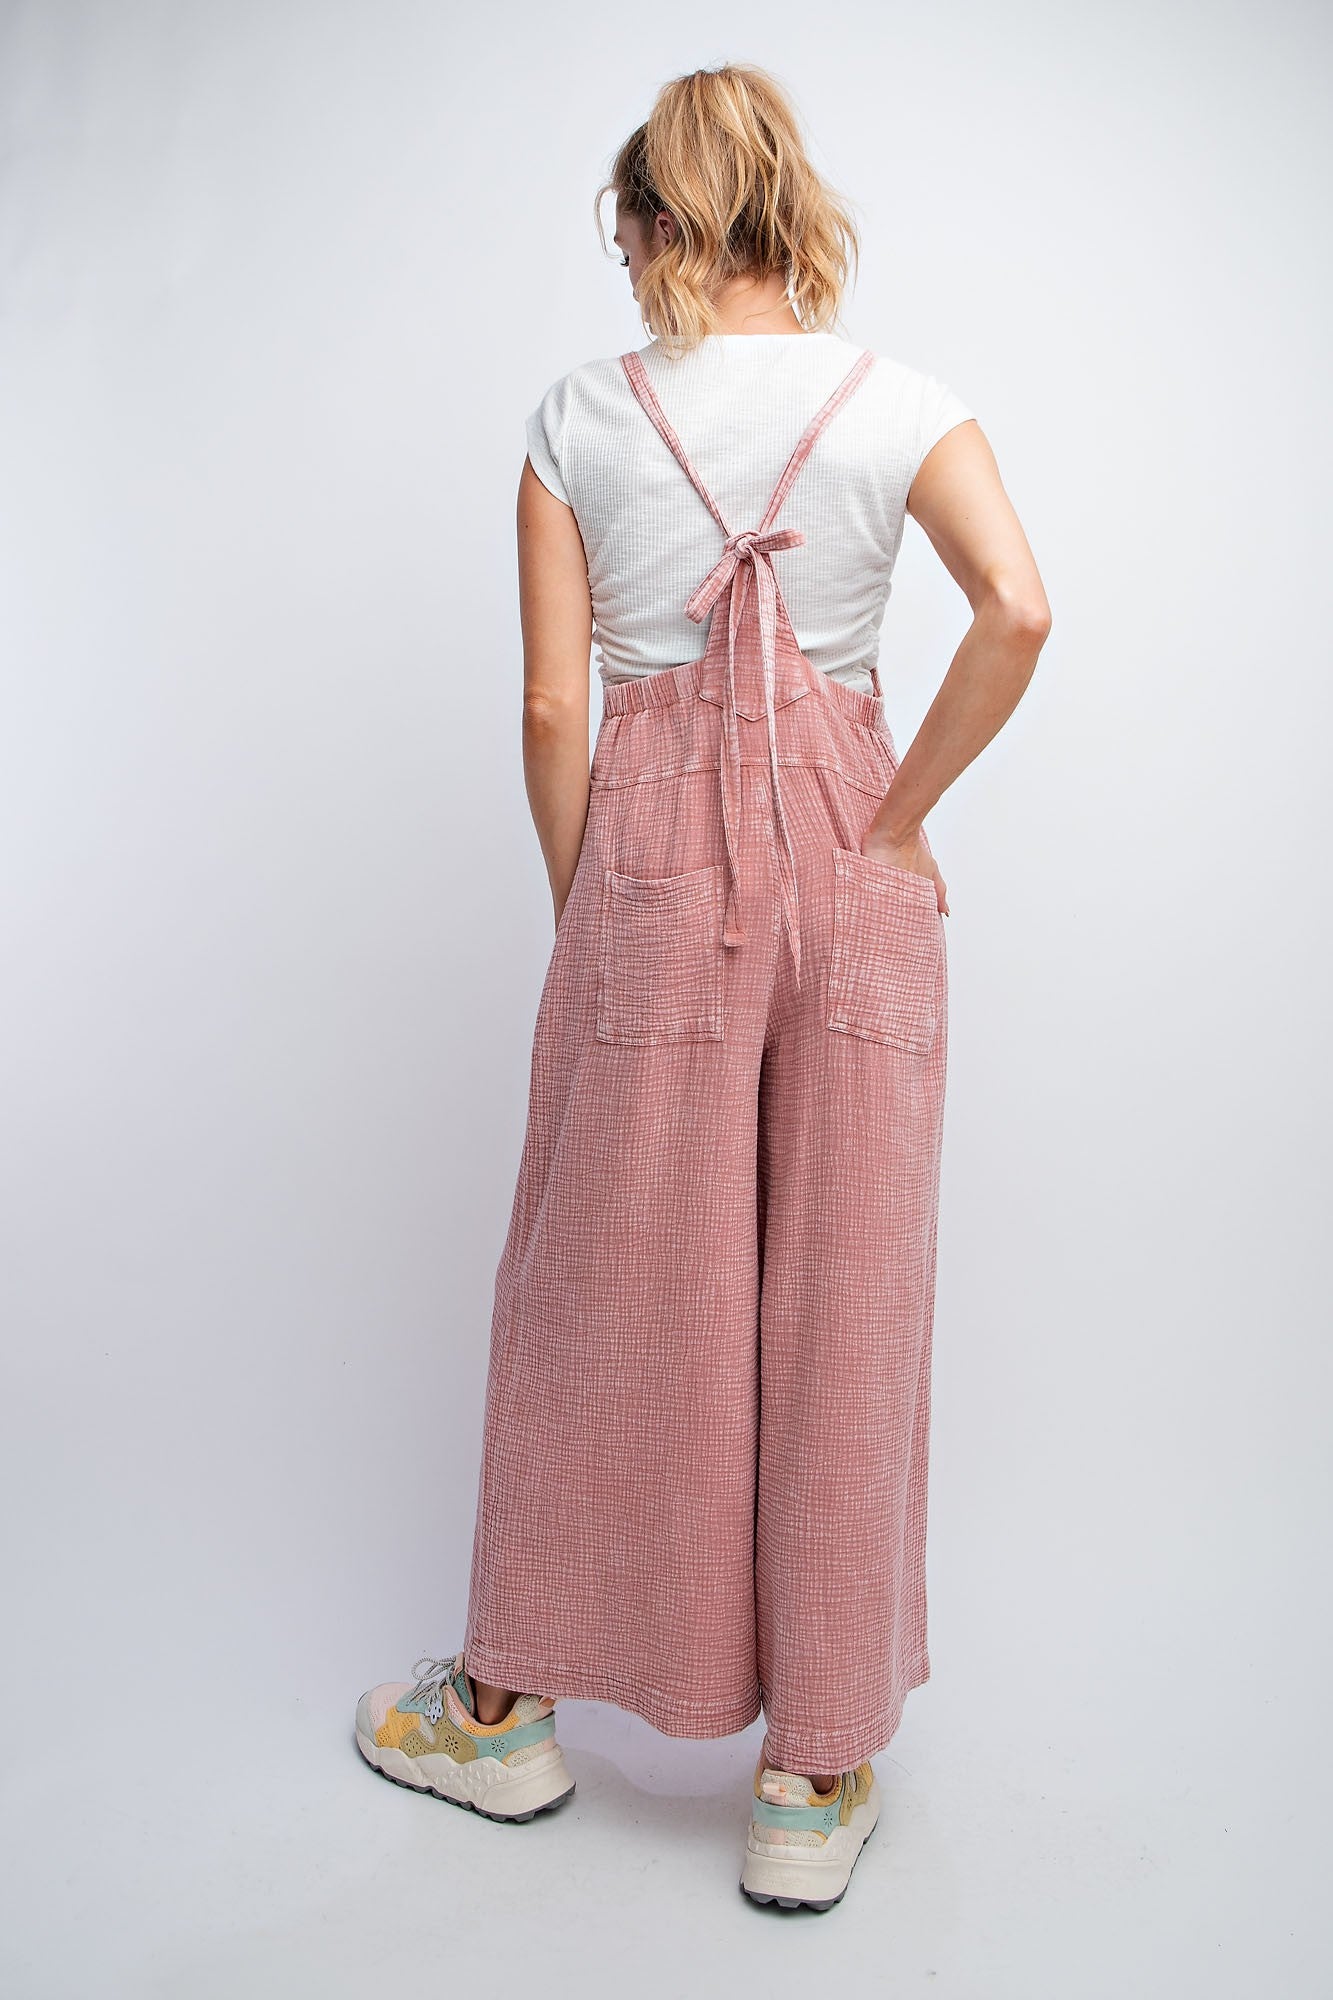 The Petunia Pink Overalls